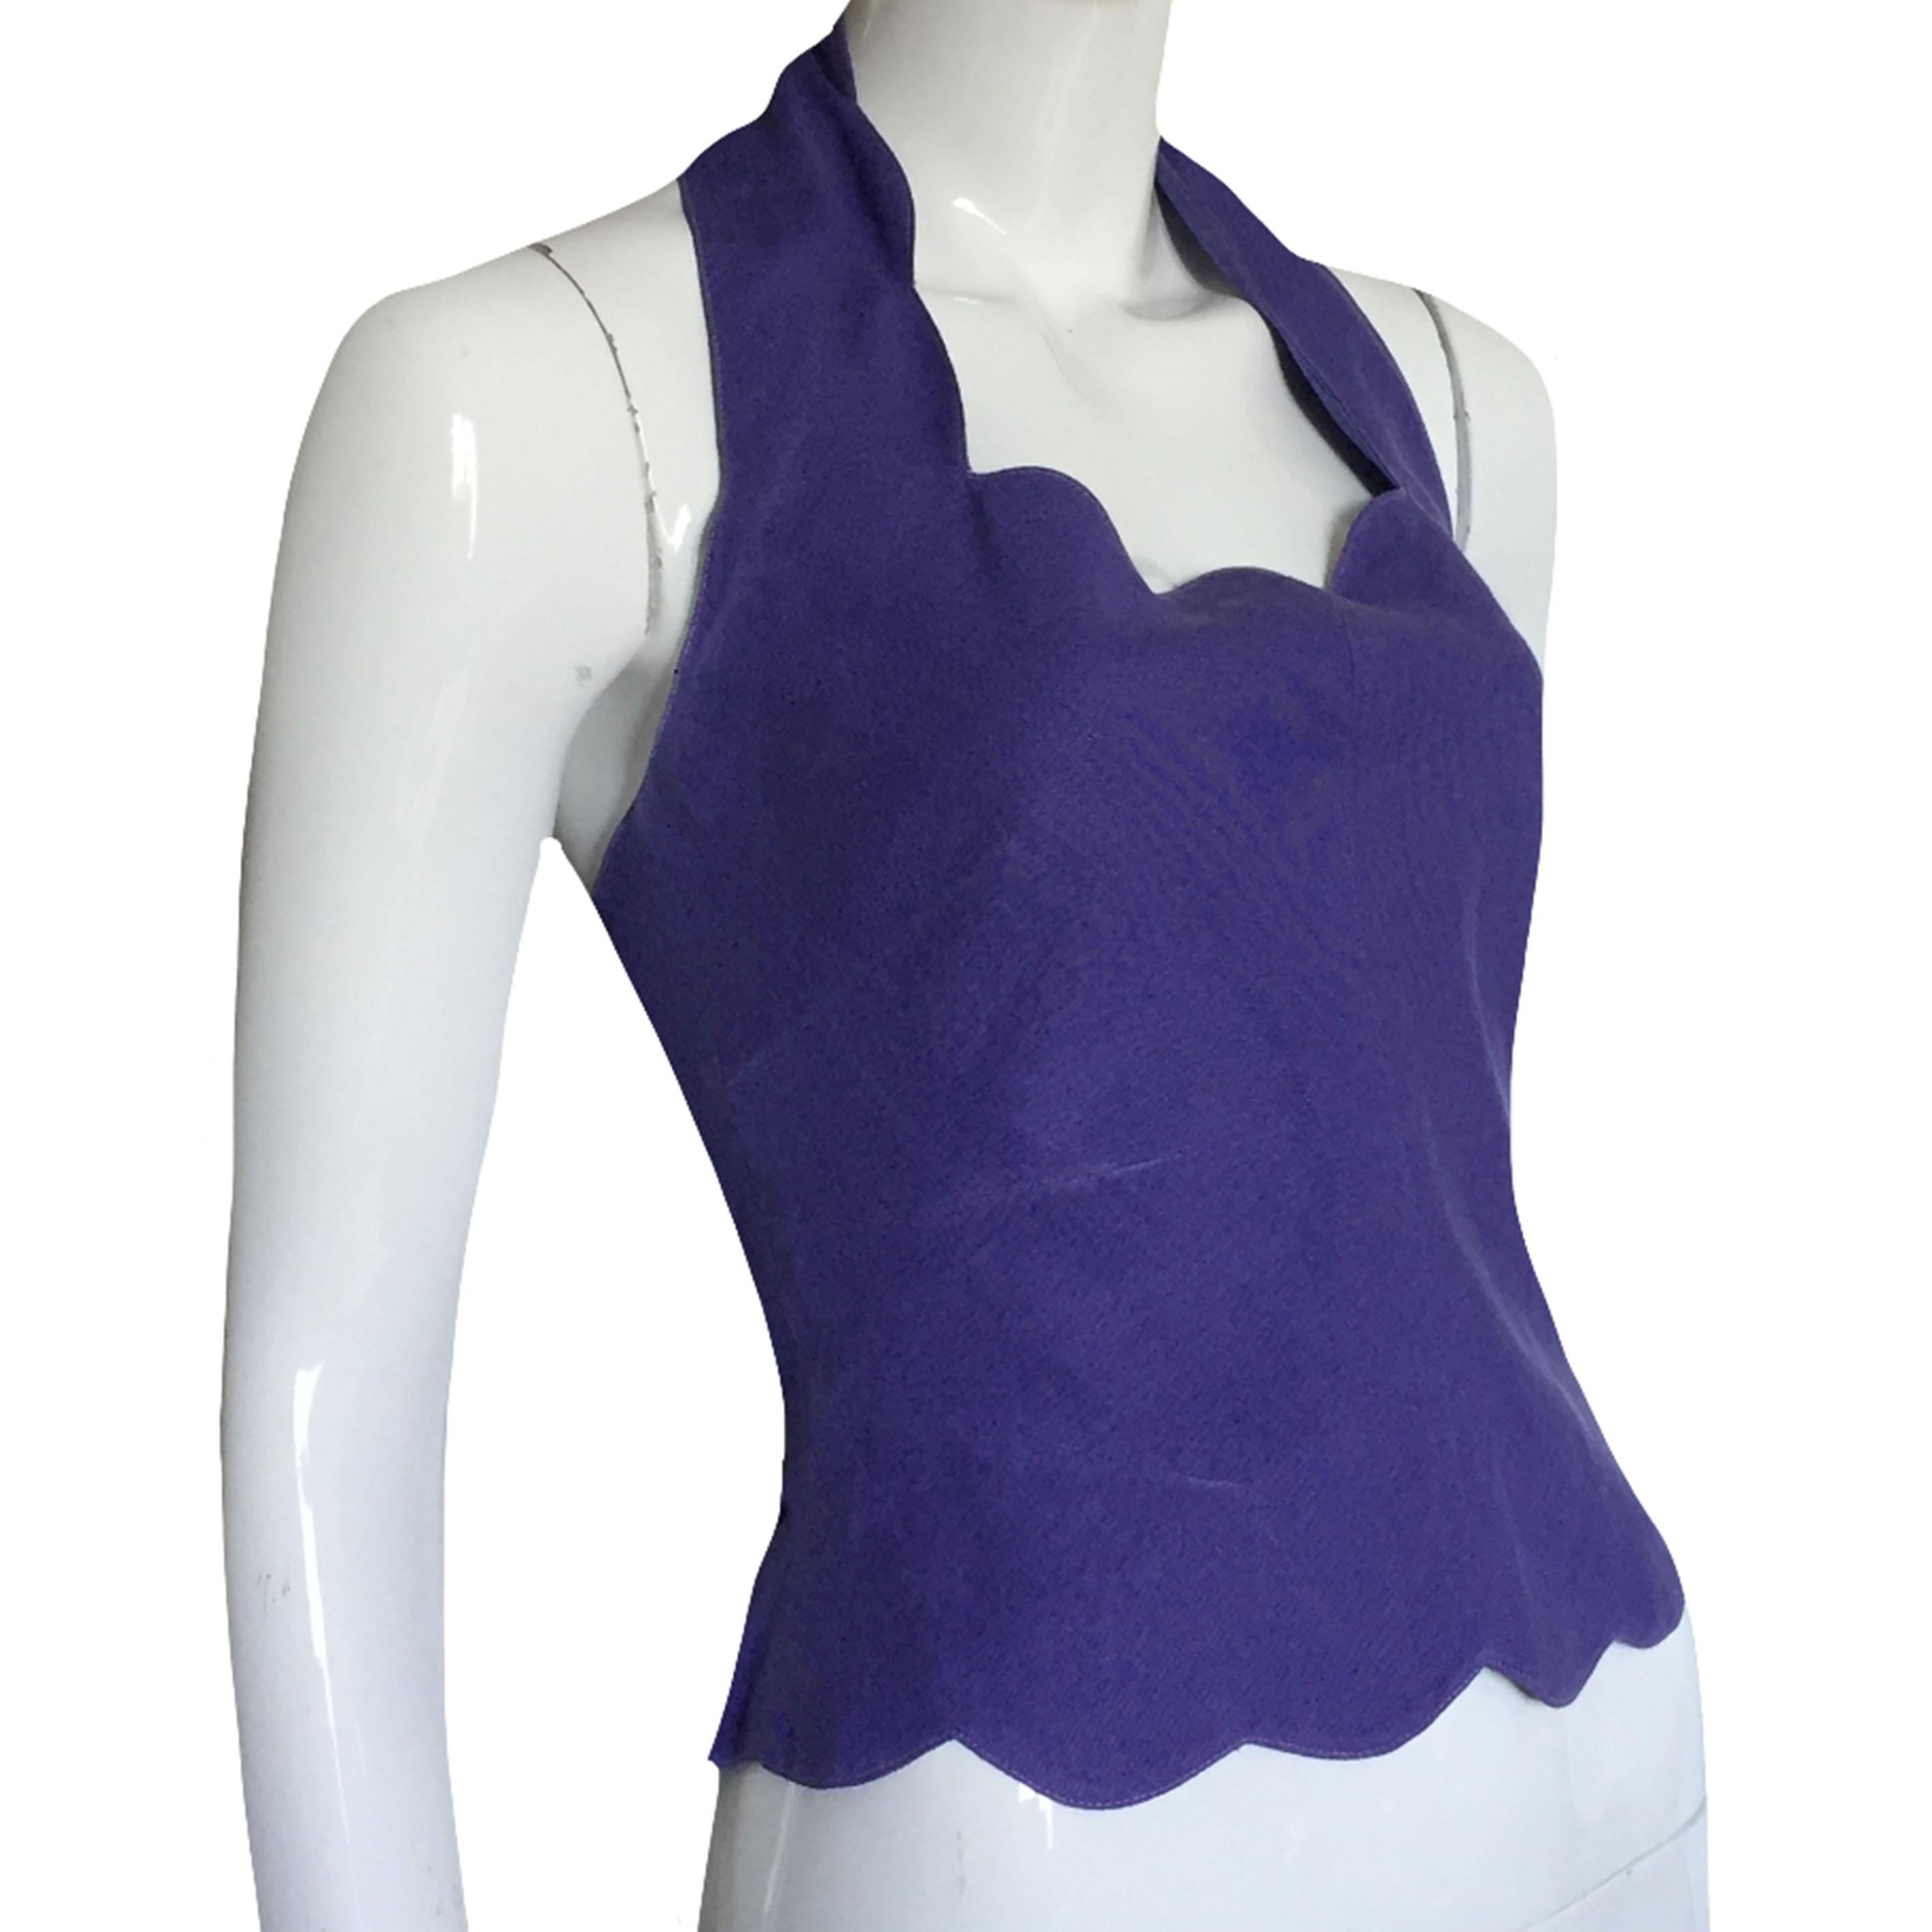 CHANTAL THOMASS SS1991 Purple linen bustier

Tag: CHANTAL THOMASS

Size M

Chest: 39cm

Waist: 35cm

Length: 54cm

100% linen

Perfect condition

Shipping worldwide with tracking number